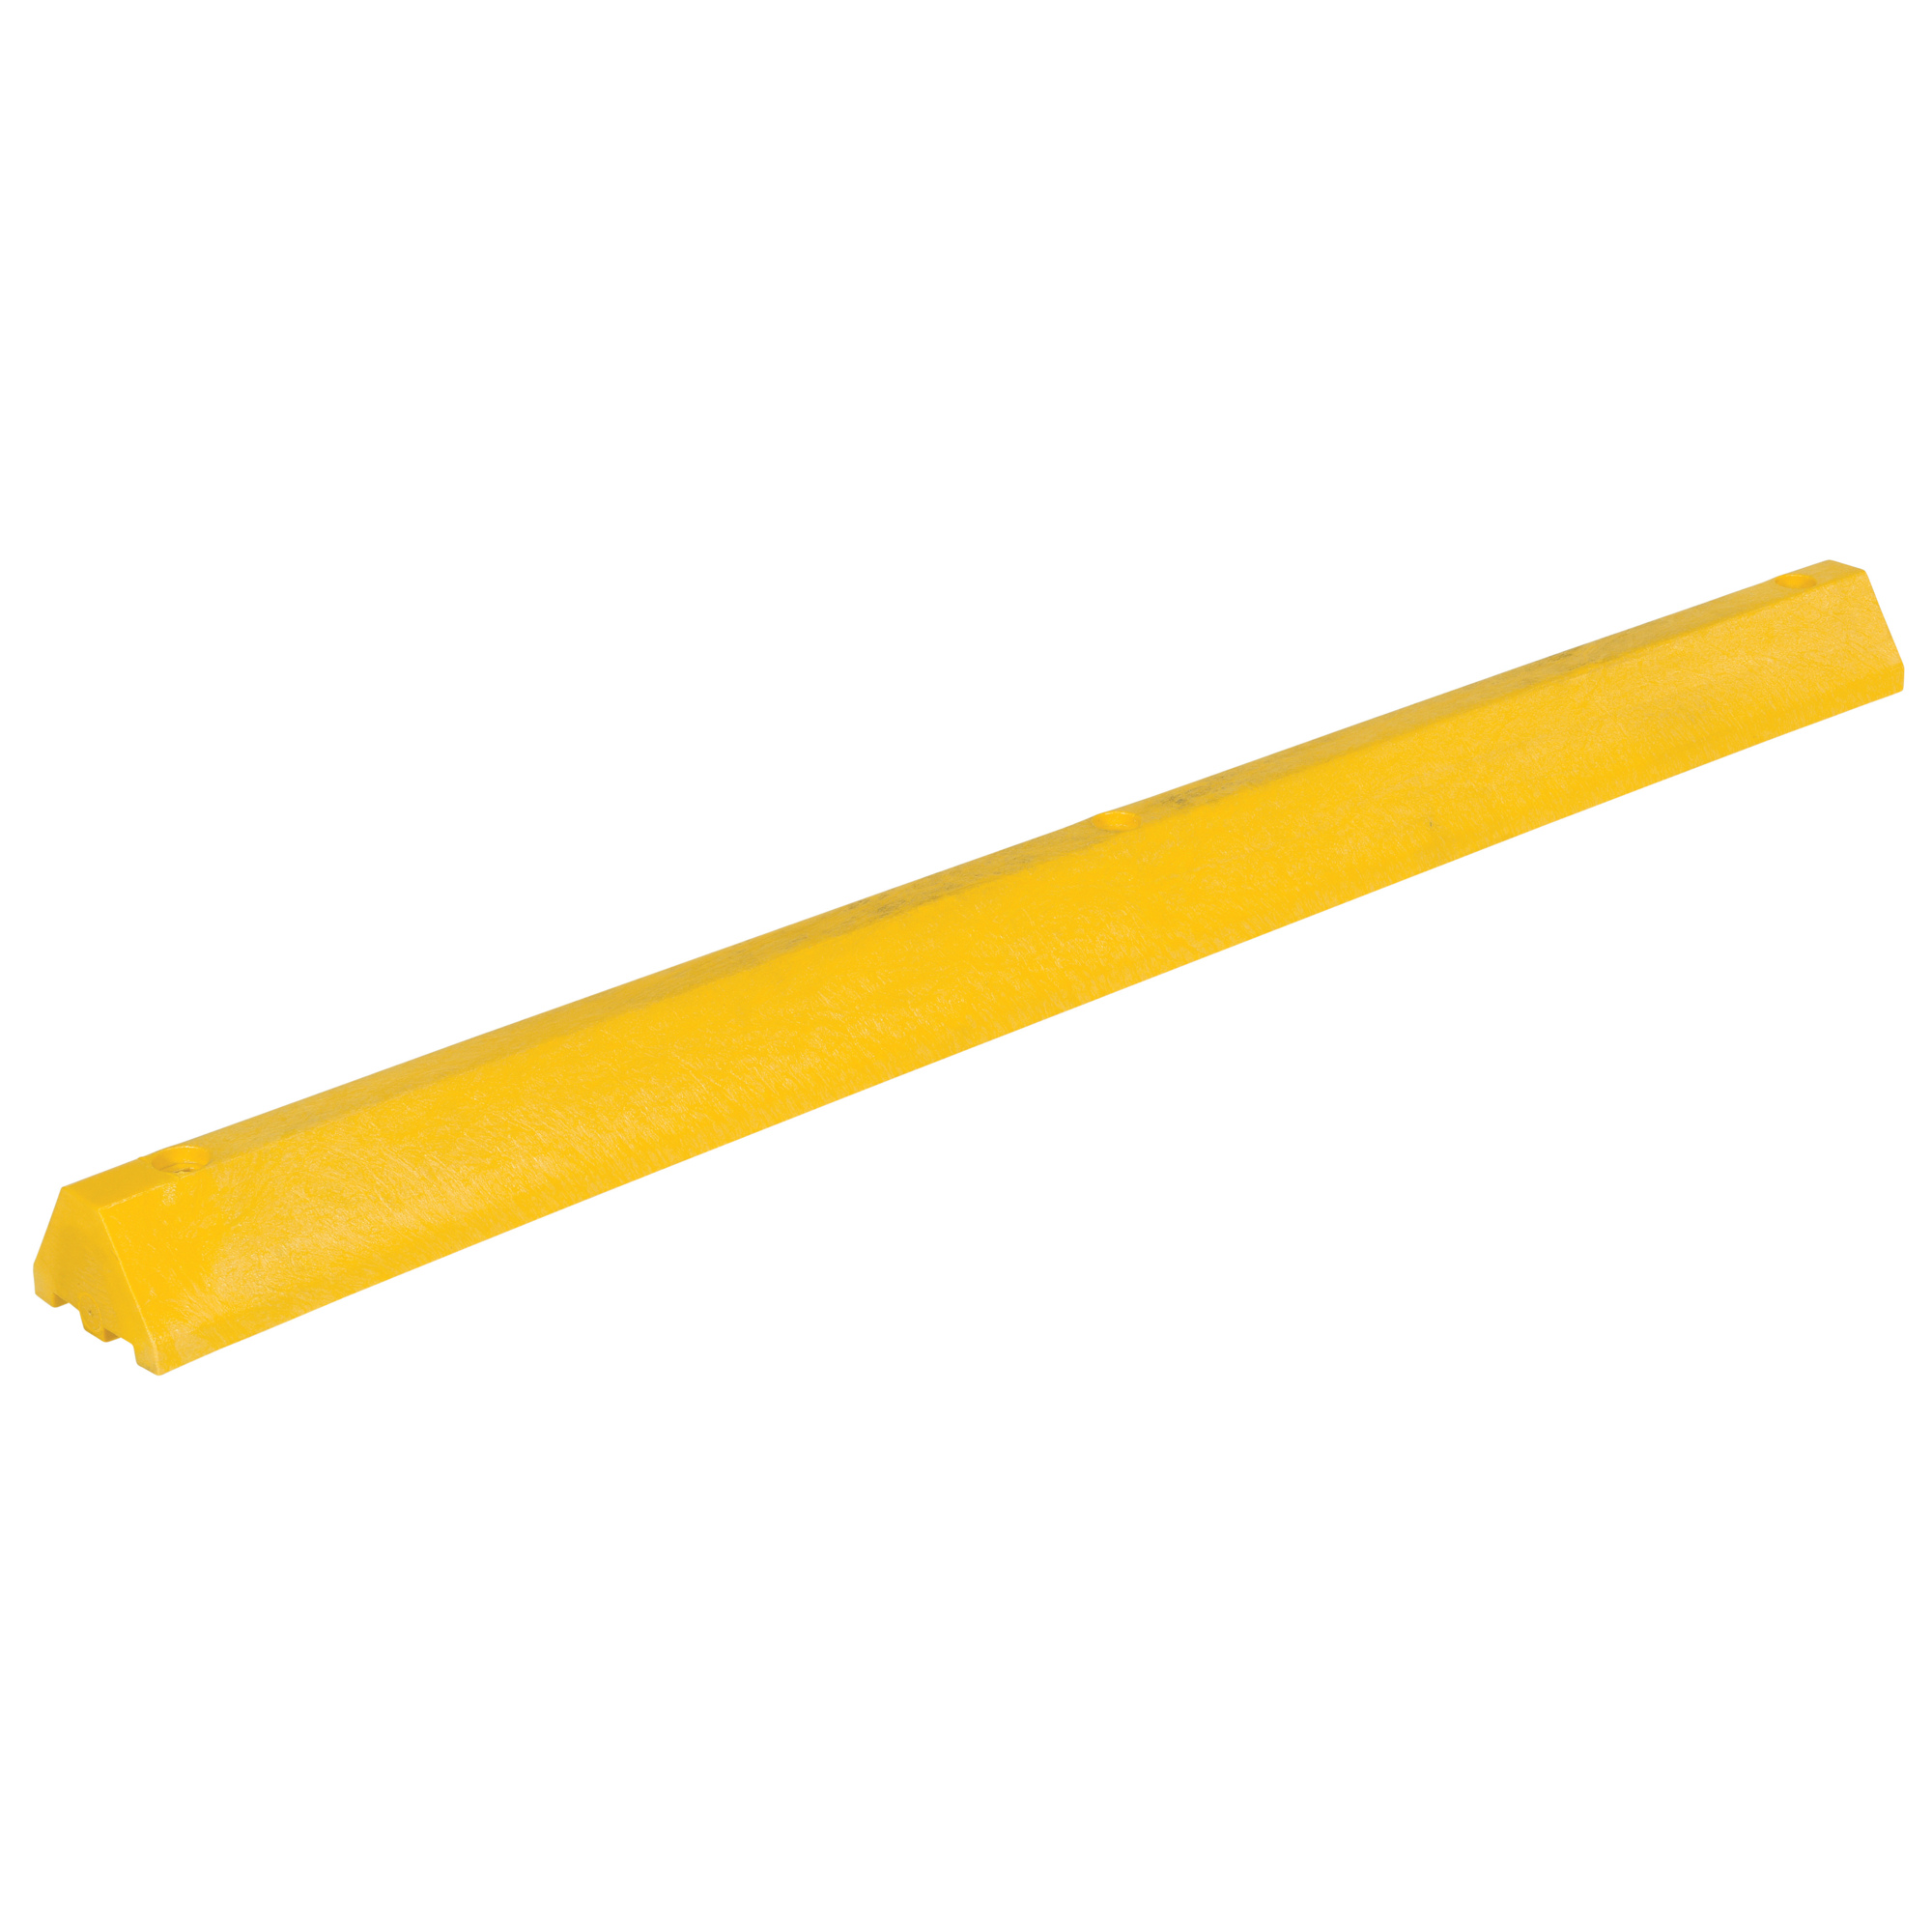 Vestil, 72Inch Recycled plastic car stop yellow, Length 72 in, Height 4 in, Material Plastic, Model CS-S72-Y